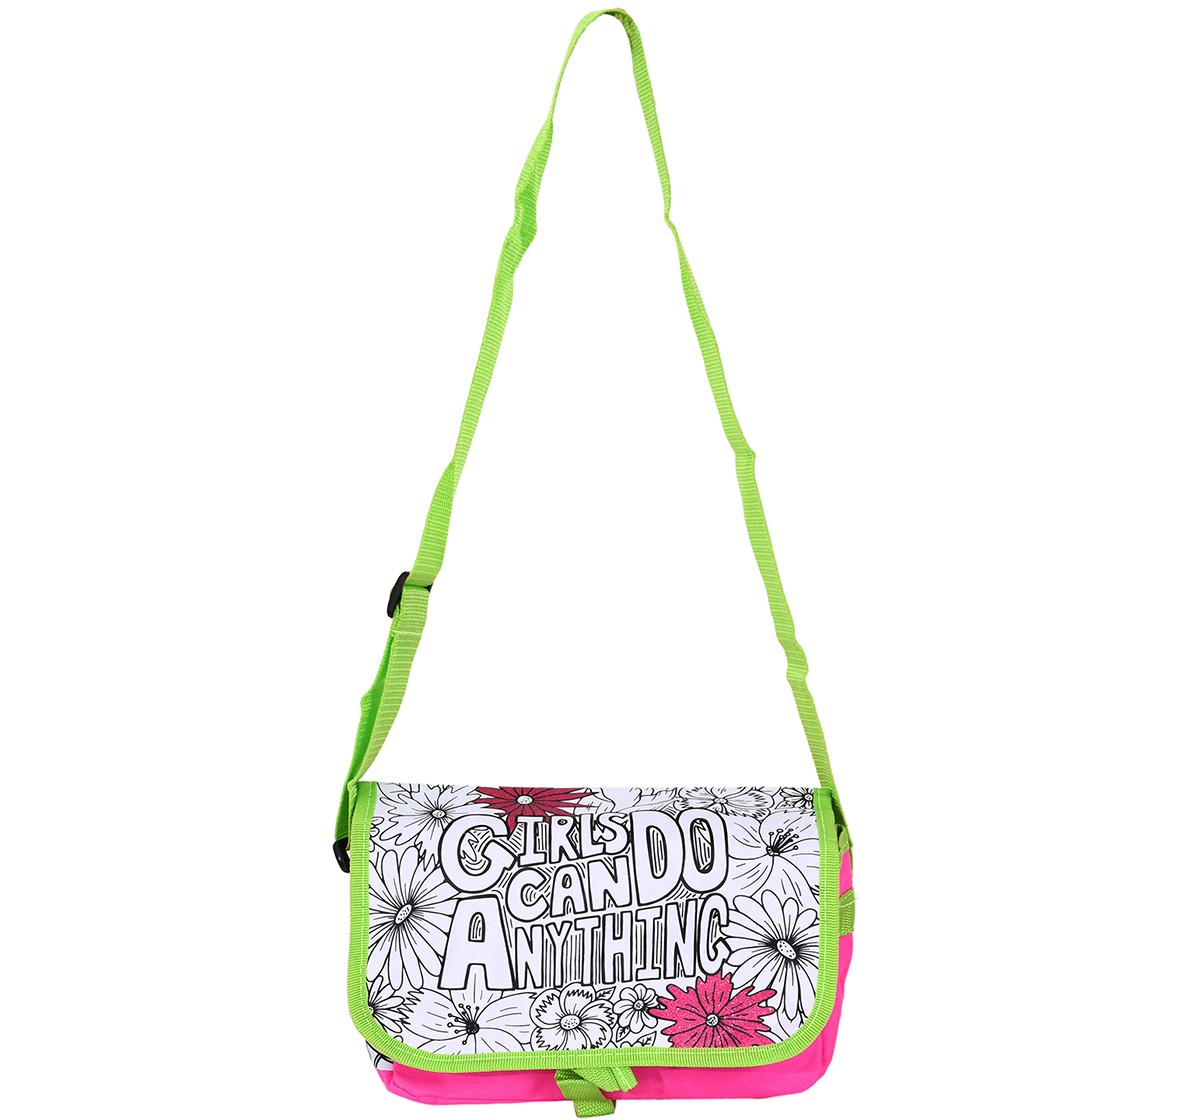 Mirada Color Your Own Girlie Sling Purse, 3Y+, Multicolour